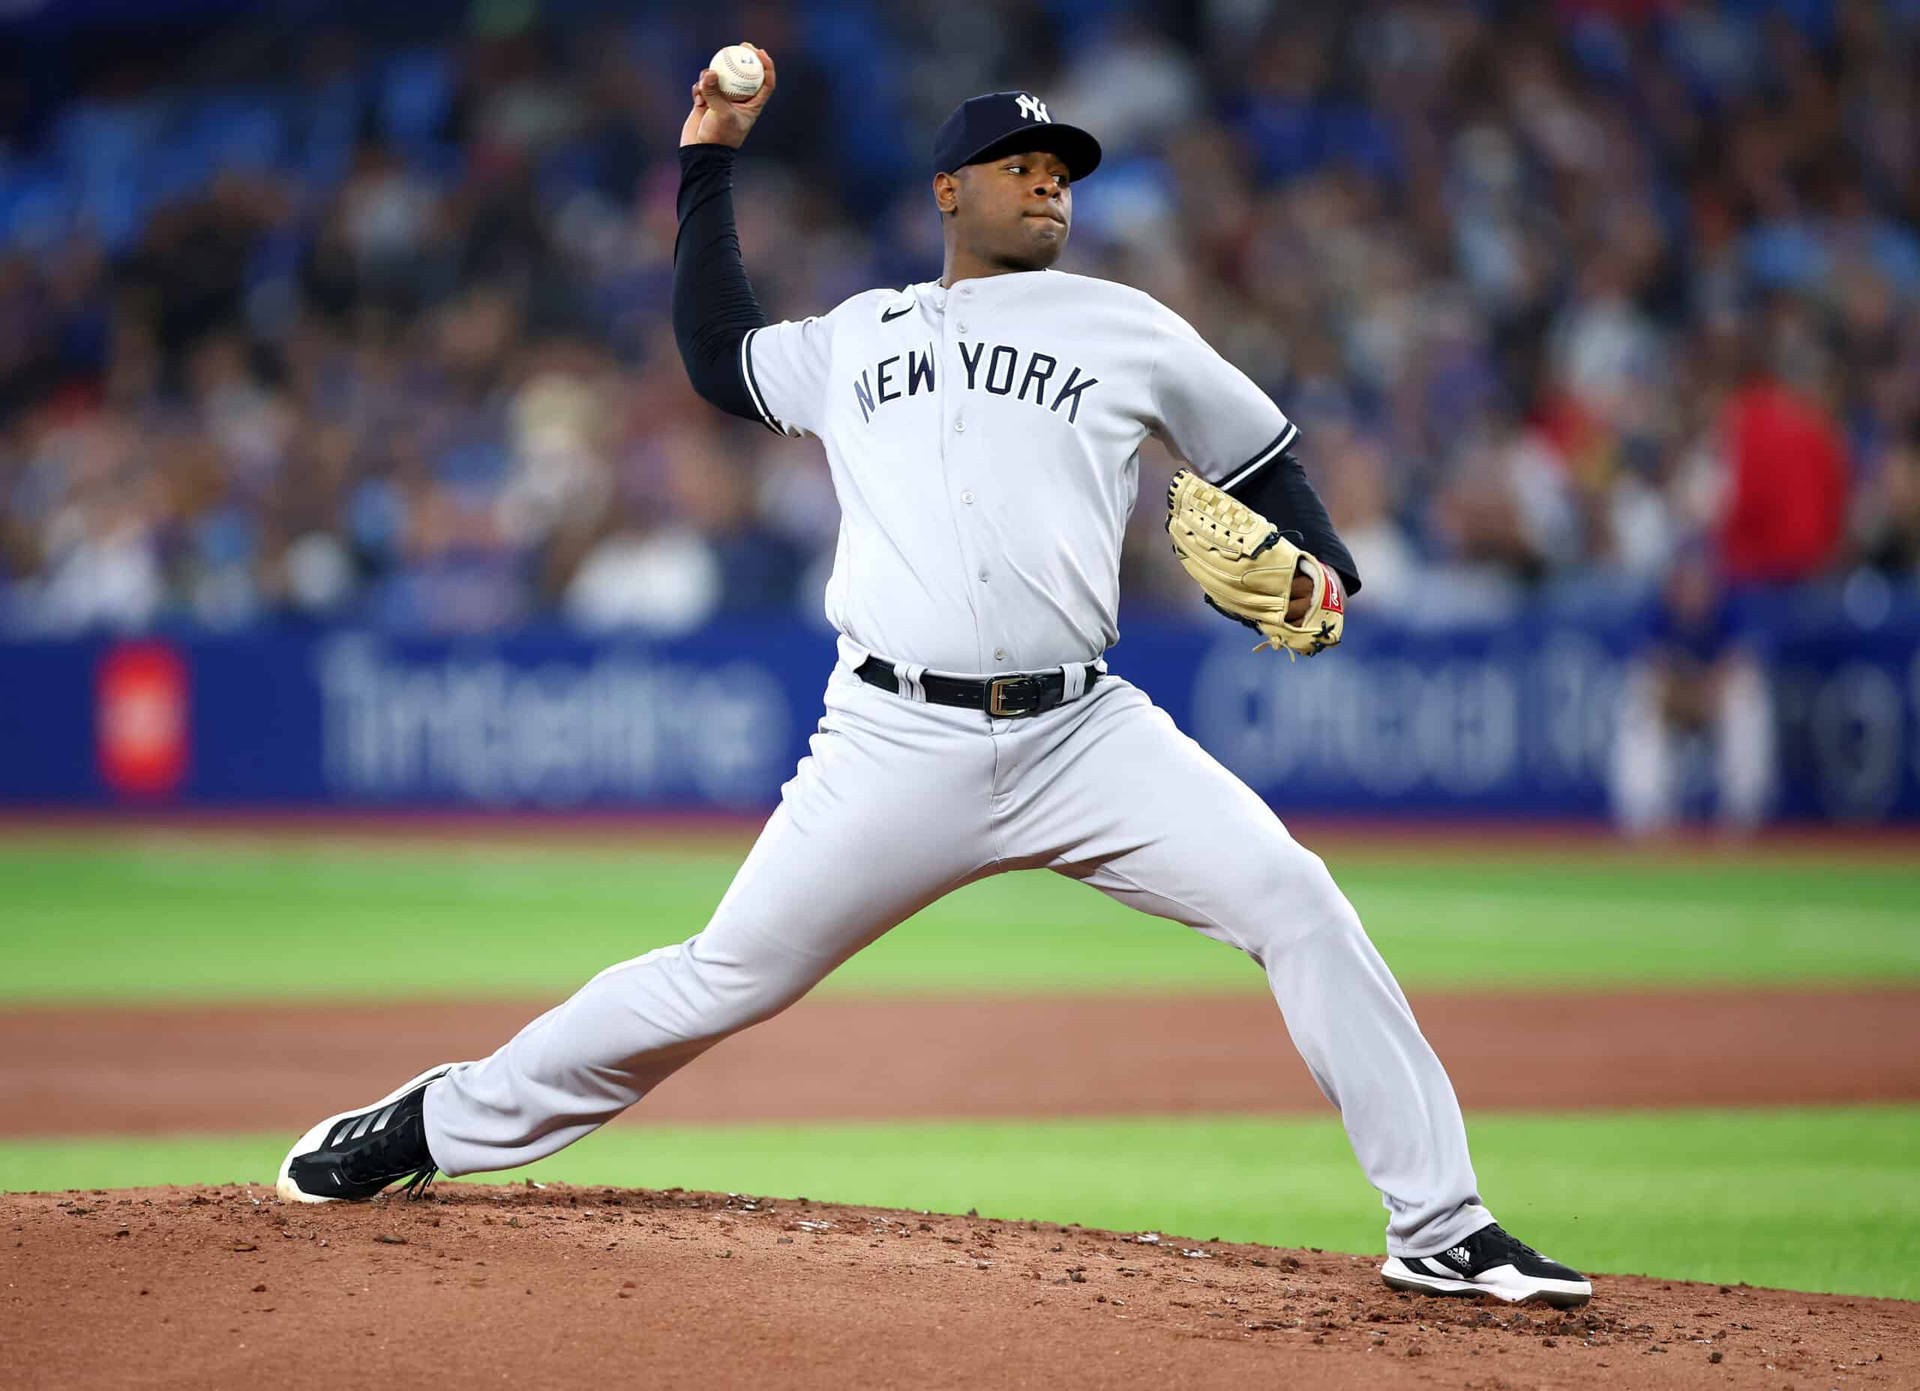 Luis Severino About To Pitch Wallpaper